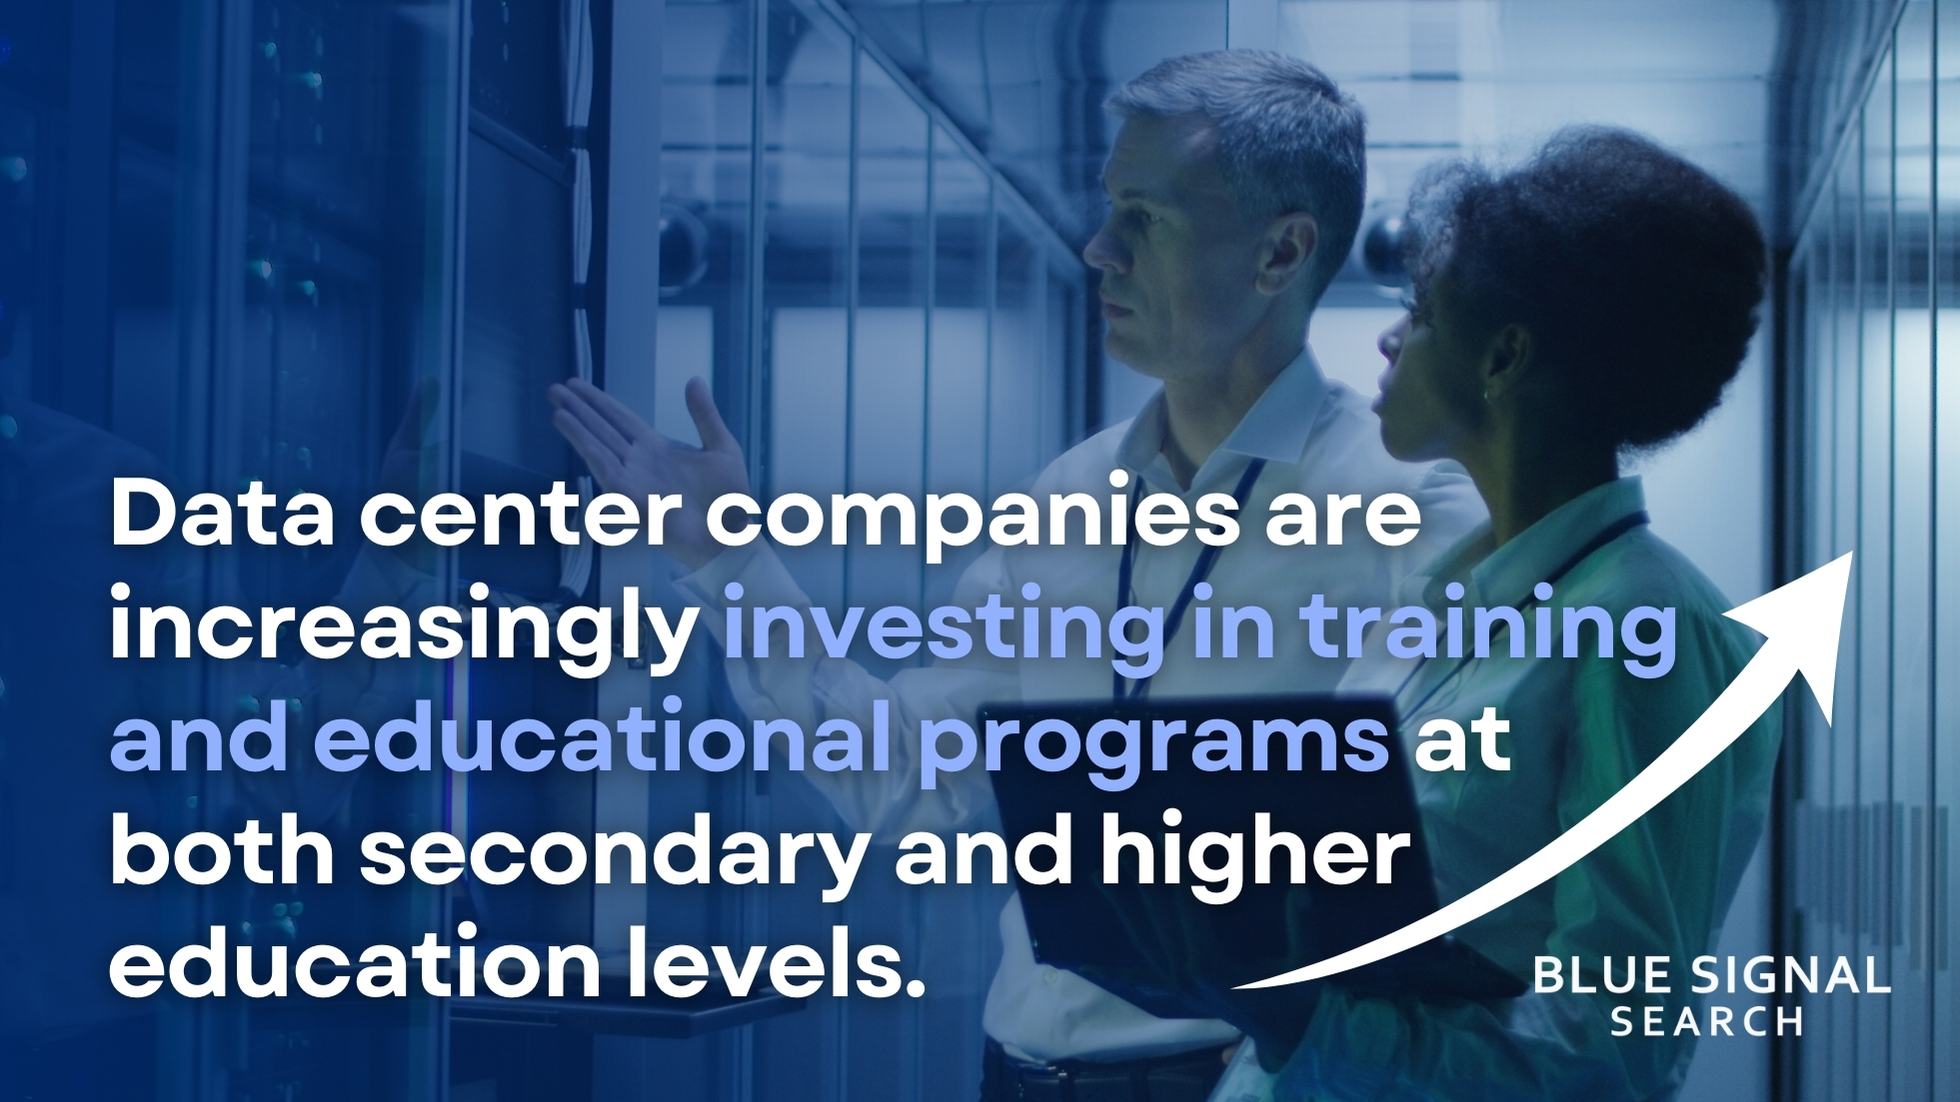 Data center companies are increasing their investments in training and educational programs text displayed over an image of an employee being trained in a data center